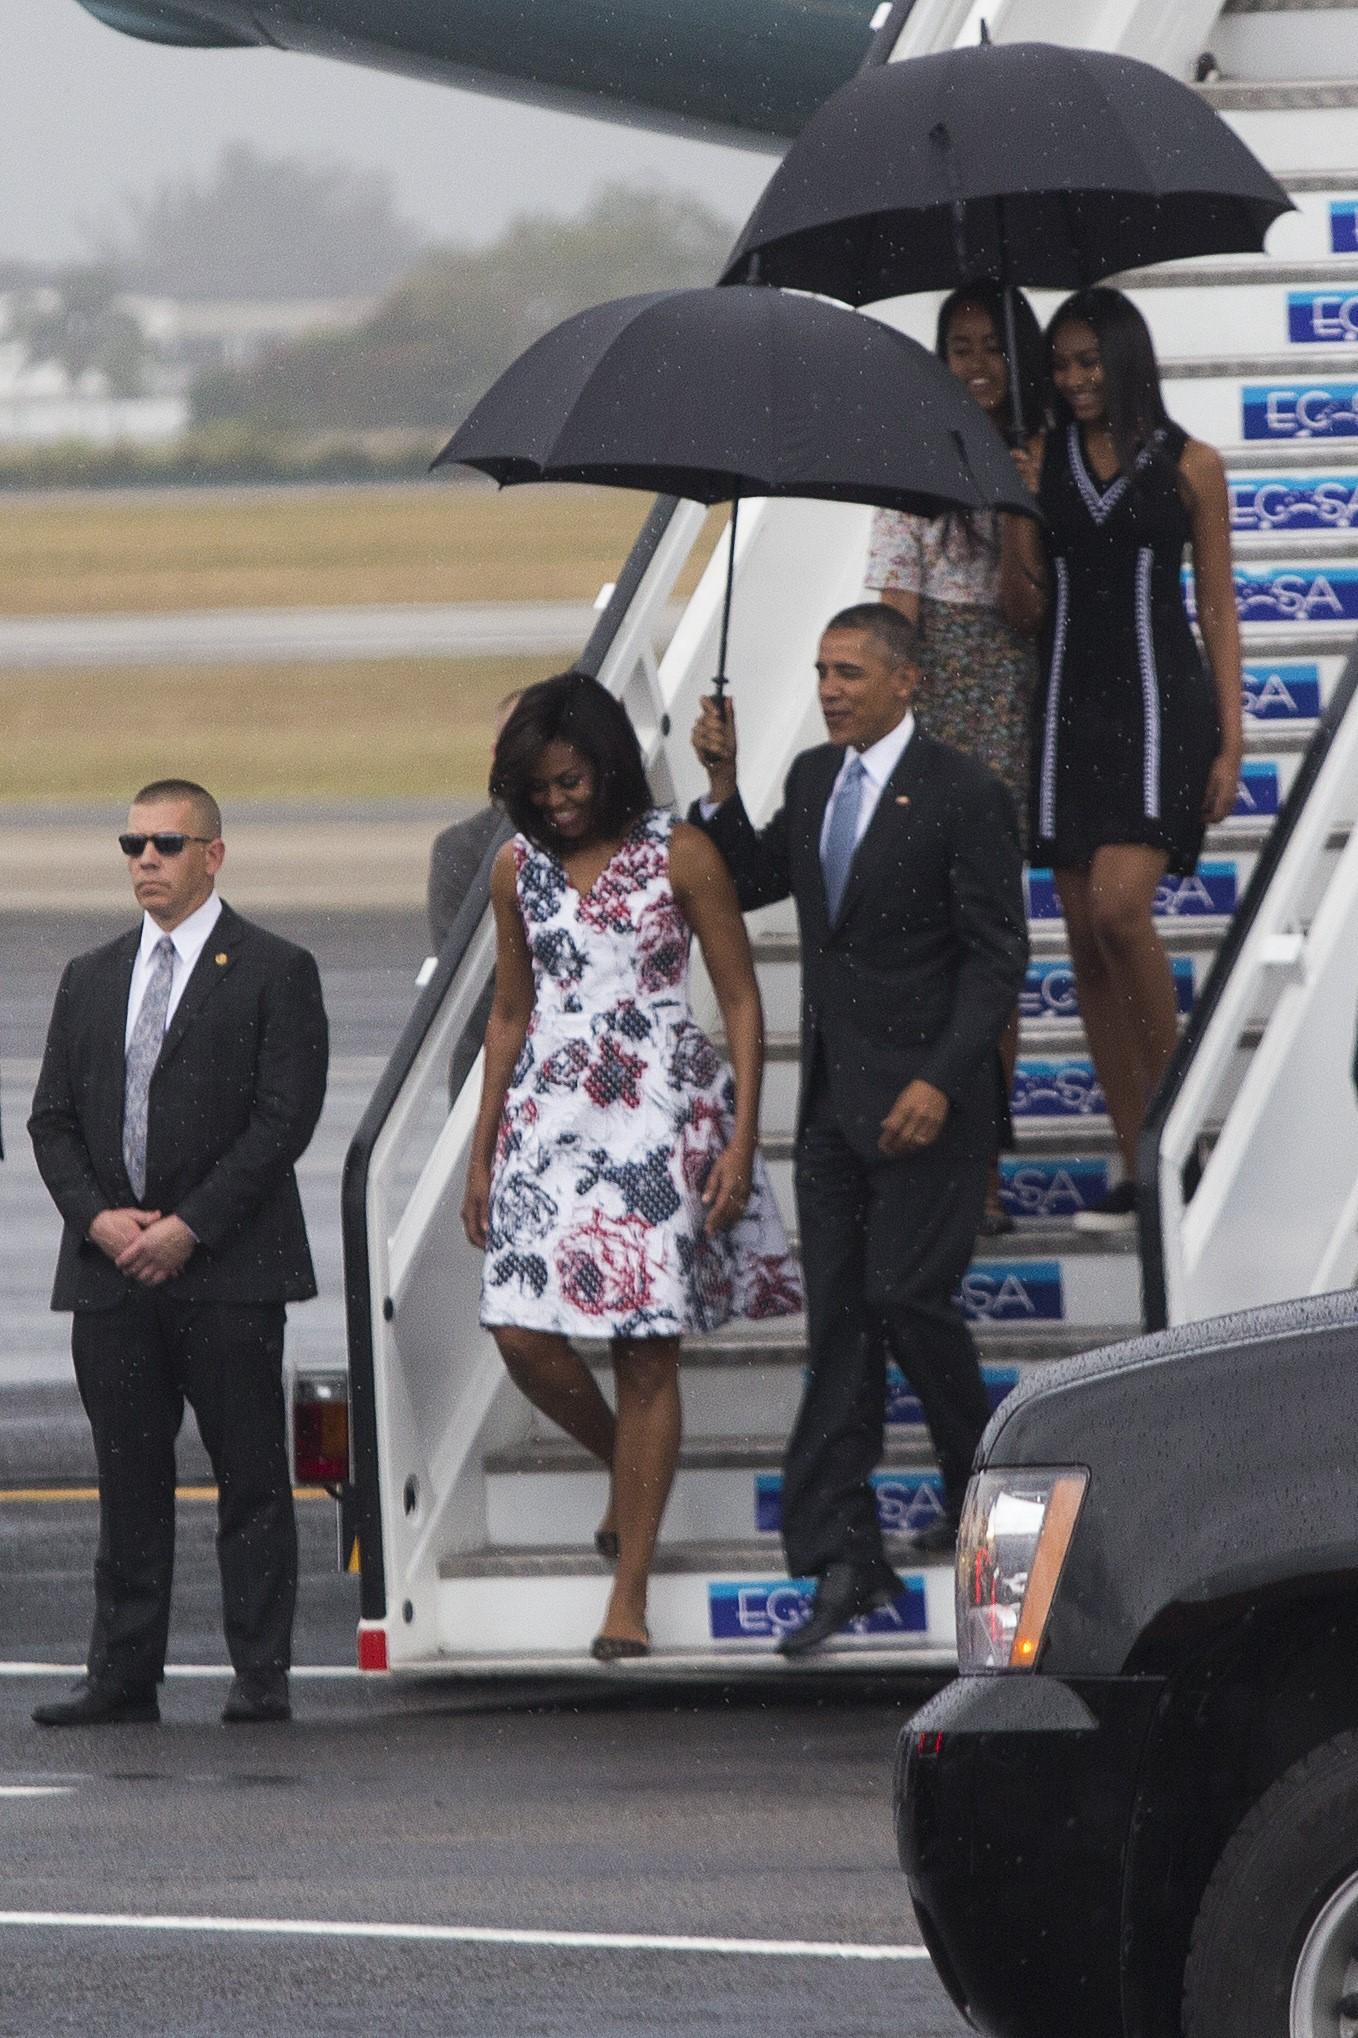 HAVANA, CUBA - MARCH 20: US President Barack Obama (3rd L) and his wife Michelle Obama (2nd L) leave official plane "Air Force One" as it landed Jose Marti İnternational Airport during the first visit to Cuba by a U.S. president in nearly 90 years, in Havana, Cuba on March 20, 2016. US President Obama were welcomed by Cuban Foreign Minister Bruno Rodriguez Padilla at the airport. Enrique Castro Sanchez / Anadolu Agency Reporters / Abaca